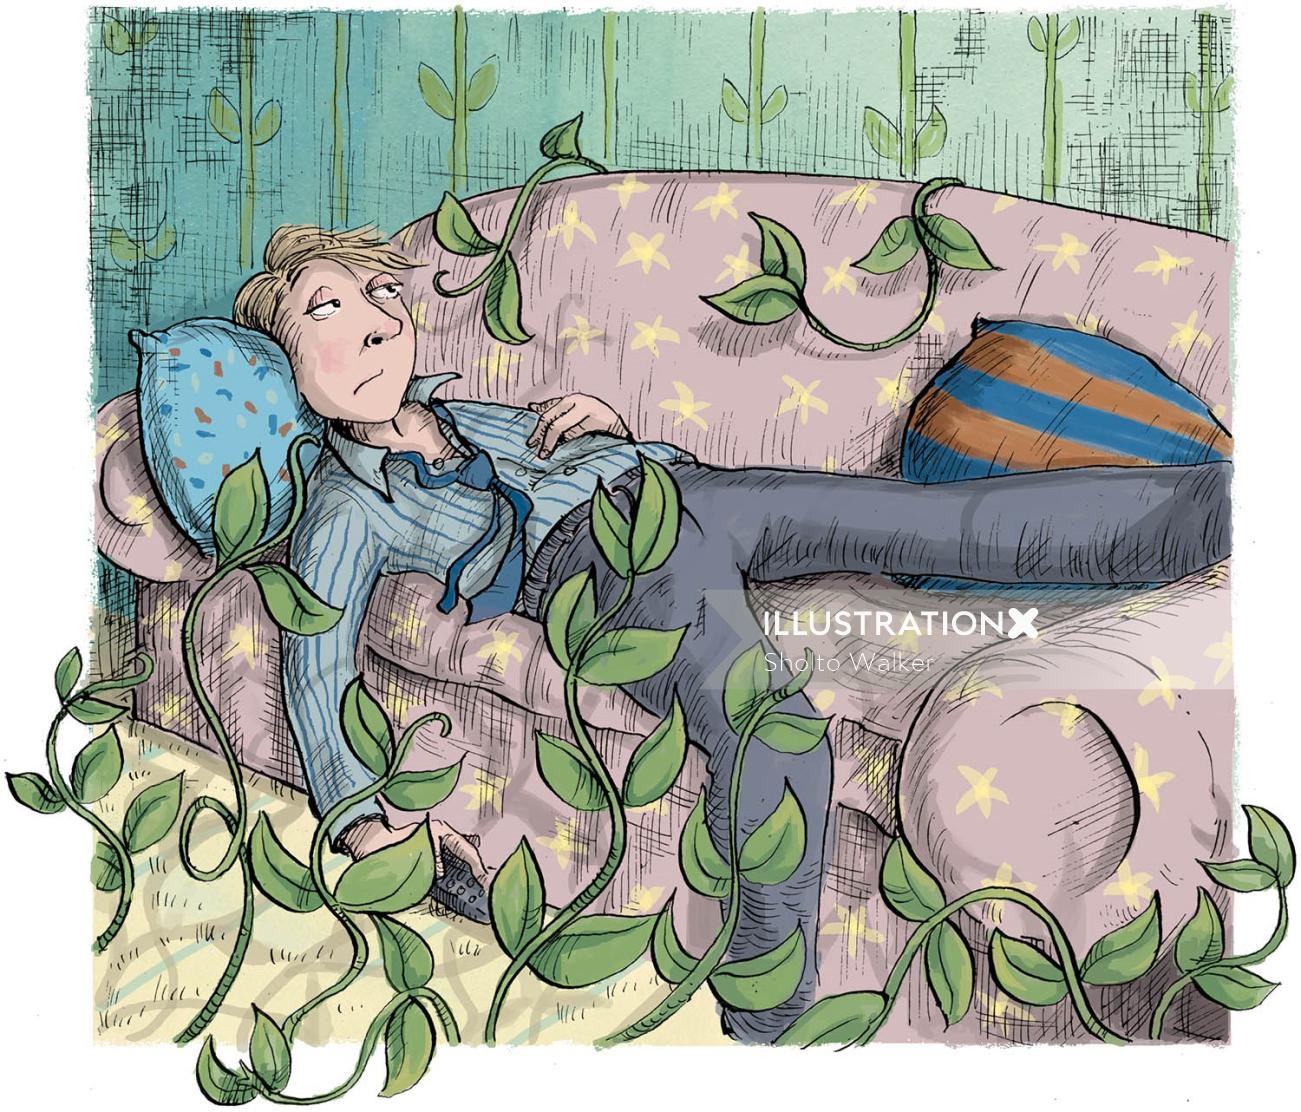 Illustration of dozing man on the couch